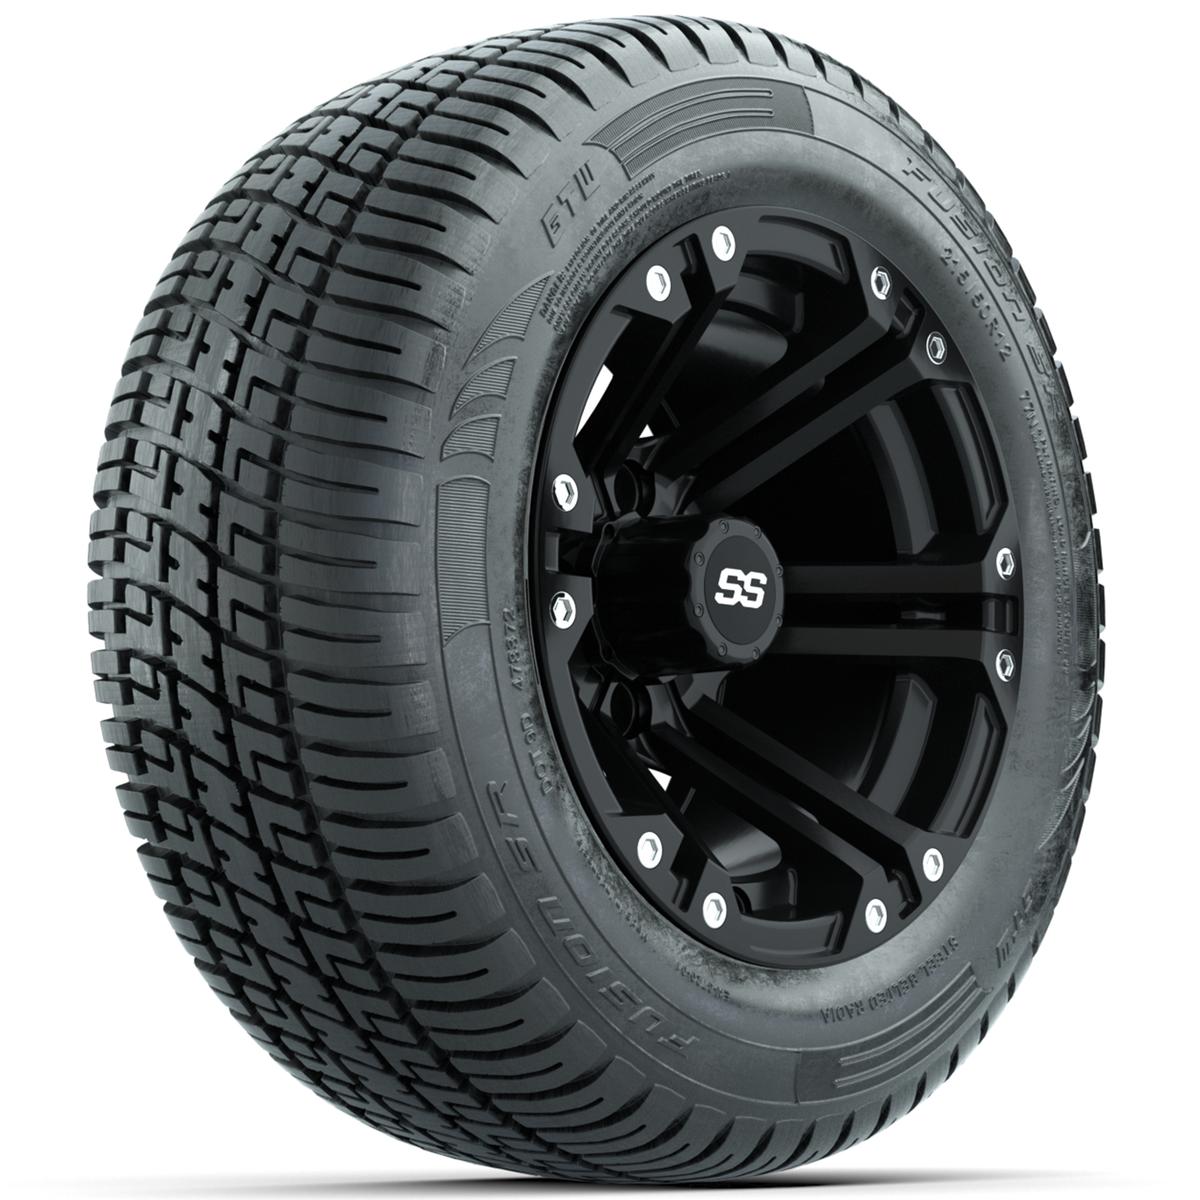 Set of (4) 12 in GTW Specter Wheels with 215/50-R12 Fusion S/R Street Tires